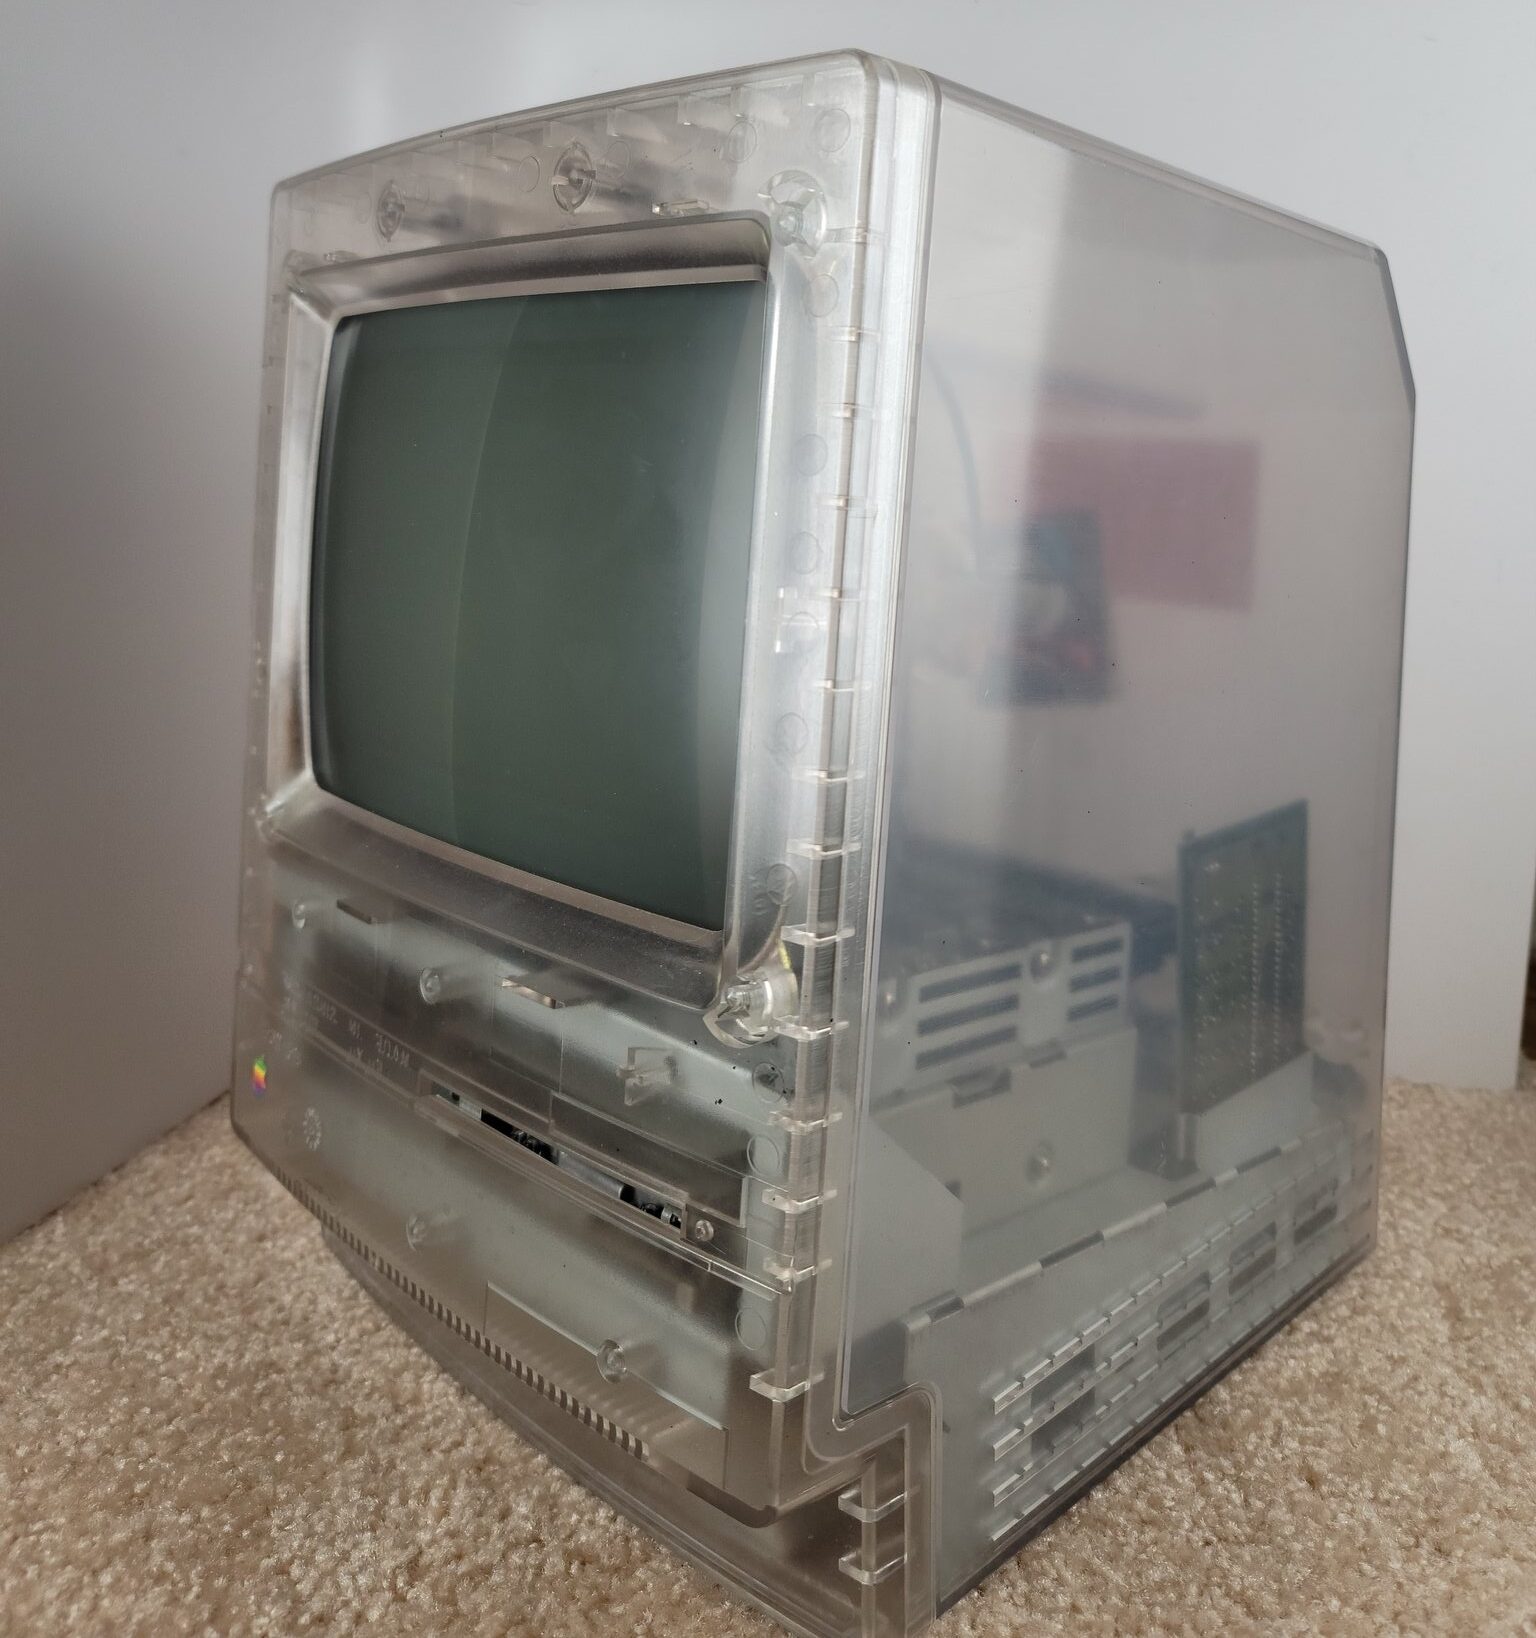 Leaked prototype shows Apple had experimented with a transparent casing for the Mac PC first released in 1990